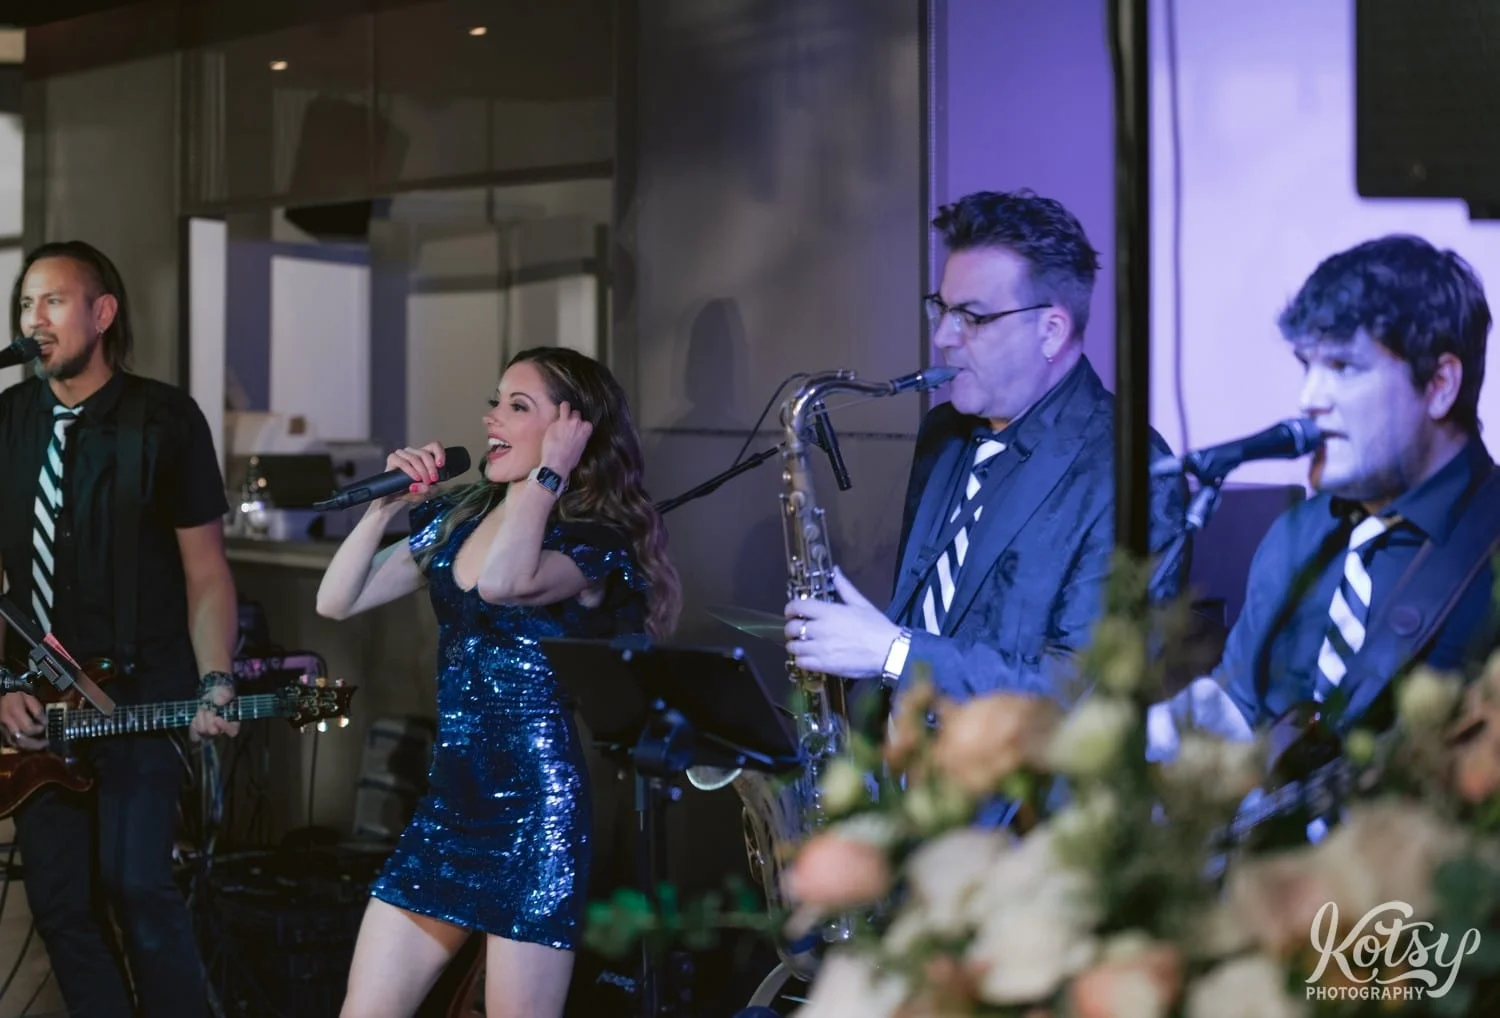 A woman in a blue sequin dress is singing into a microphone with a band featuring a guitar player saxophone player and bass guitarist during a Second Floor Events wedding reception in Toronto, Canada.